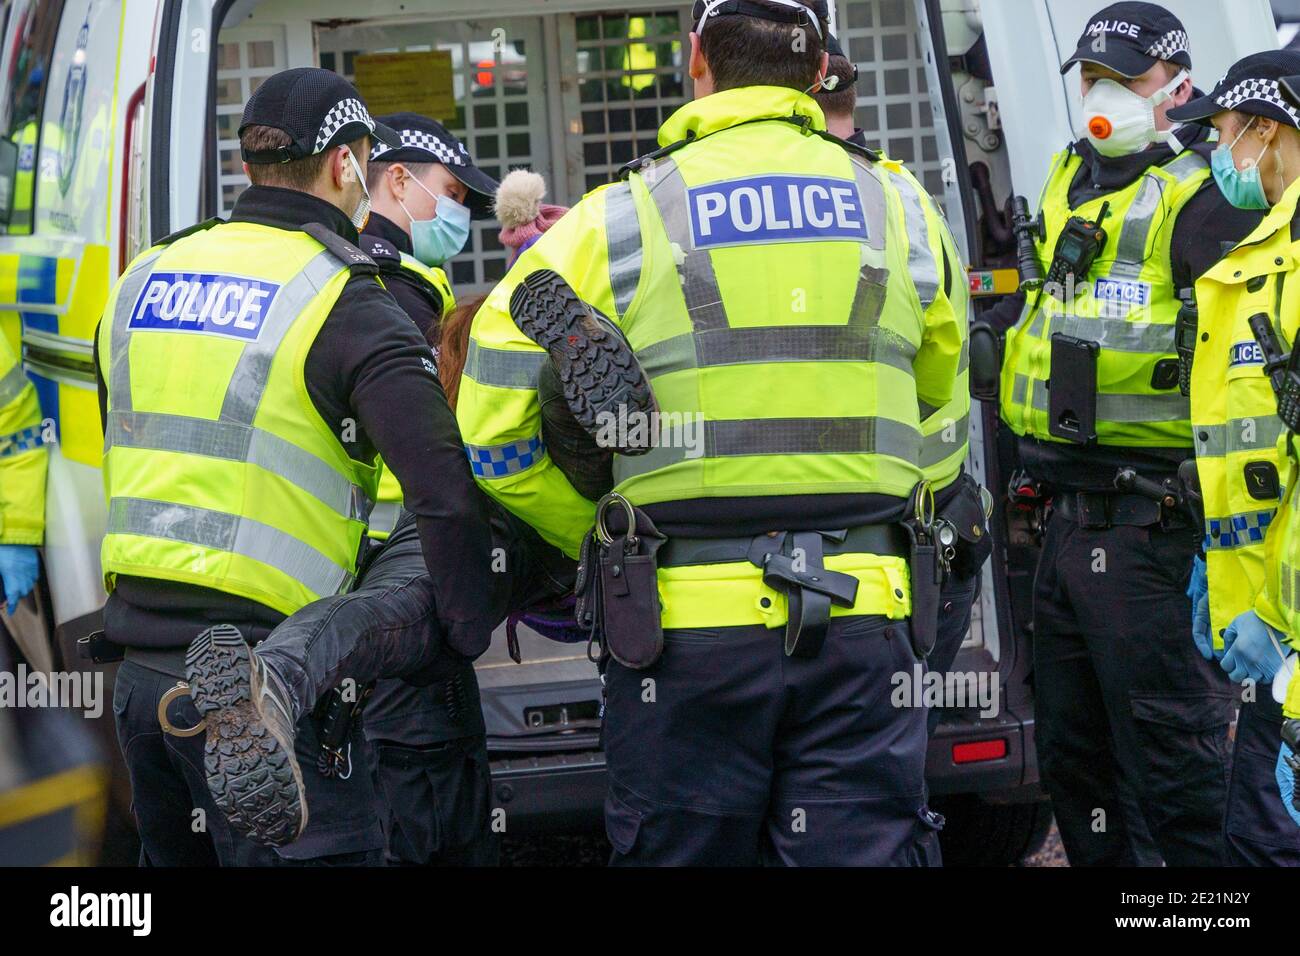 Edinburgh, Scotland, UK. 11 January 2021. Protester arrested in violent scenes at anti lockdown demonstration at Scottish Parliament in Edinburgh today. Several protesters took part but  a heavy and aggressive police presence prevented demonstration and planned march to Bute House. During national Covid-19 lockdown such protests are illegal and police advised people not to attend the demonstration. Pic; Female protester is arrested and bundled into a police van.  Iain Masterton/Alamy Live News Stock Photo